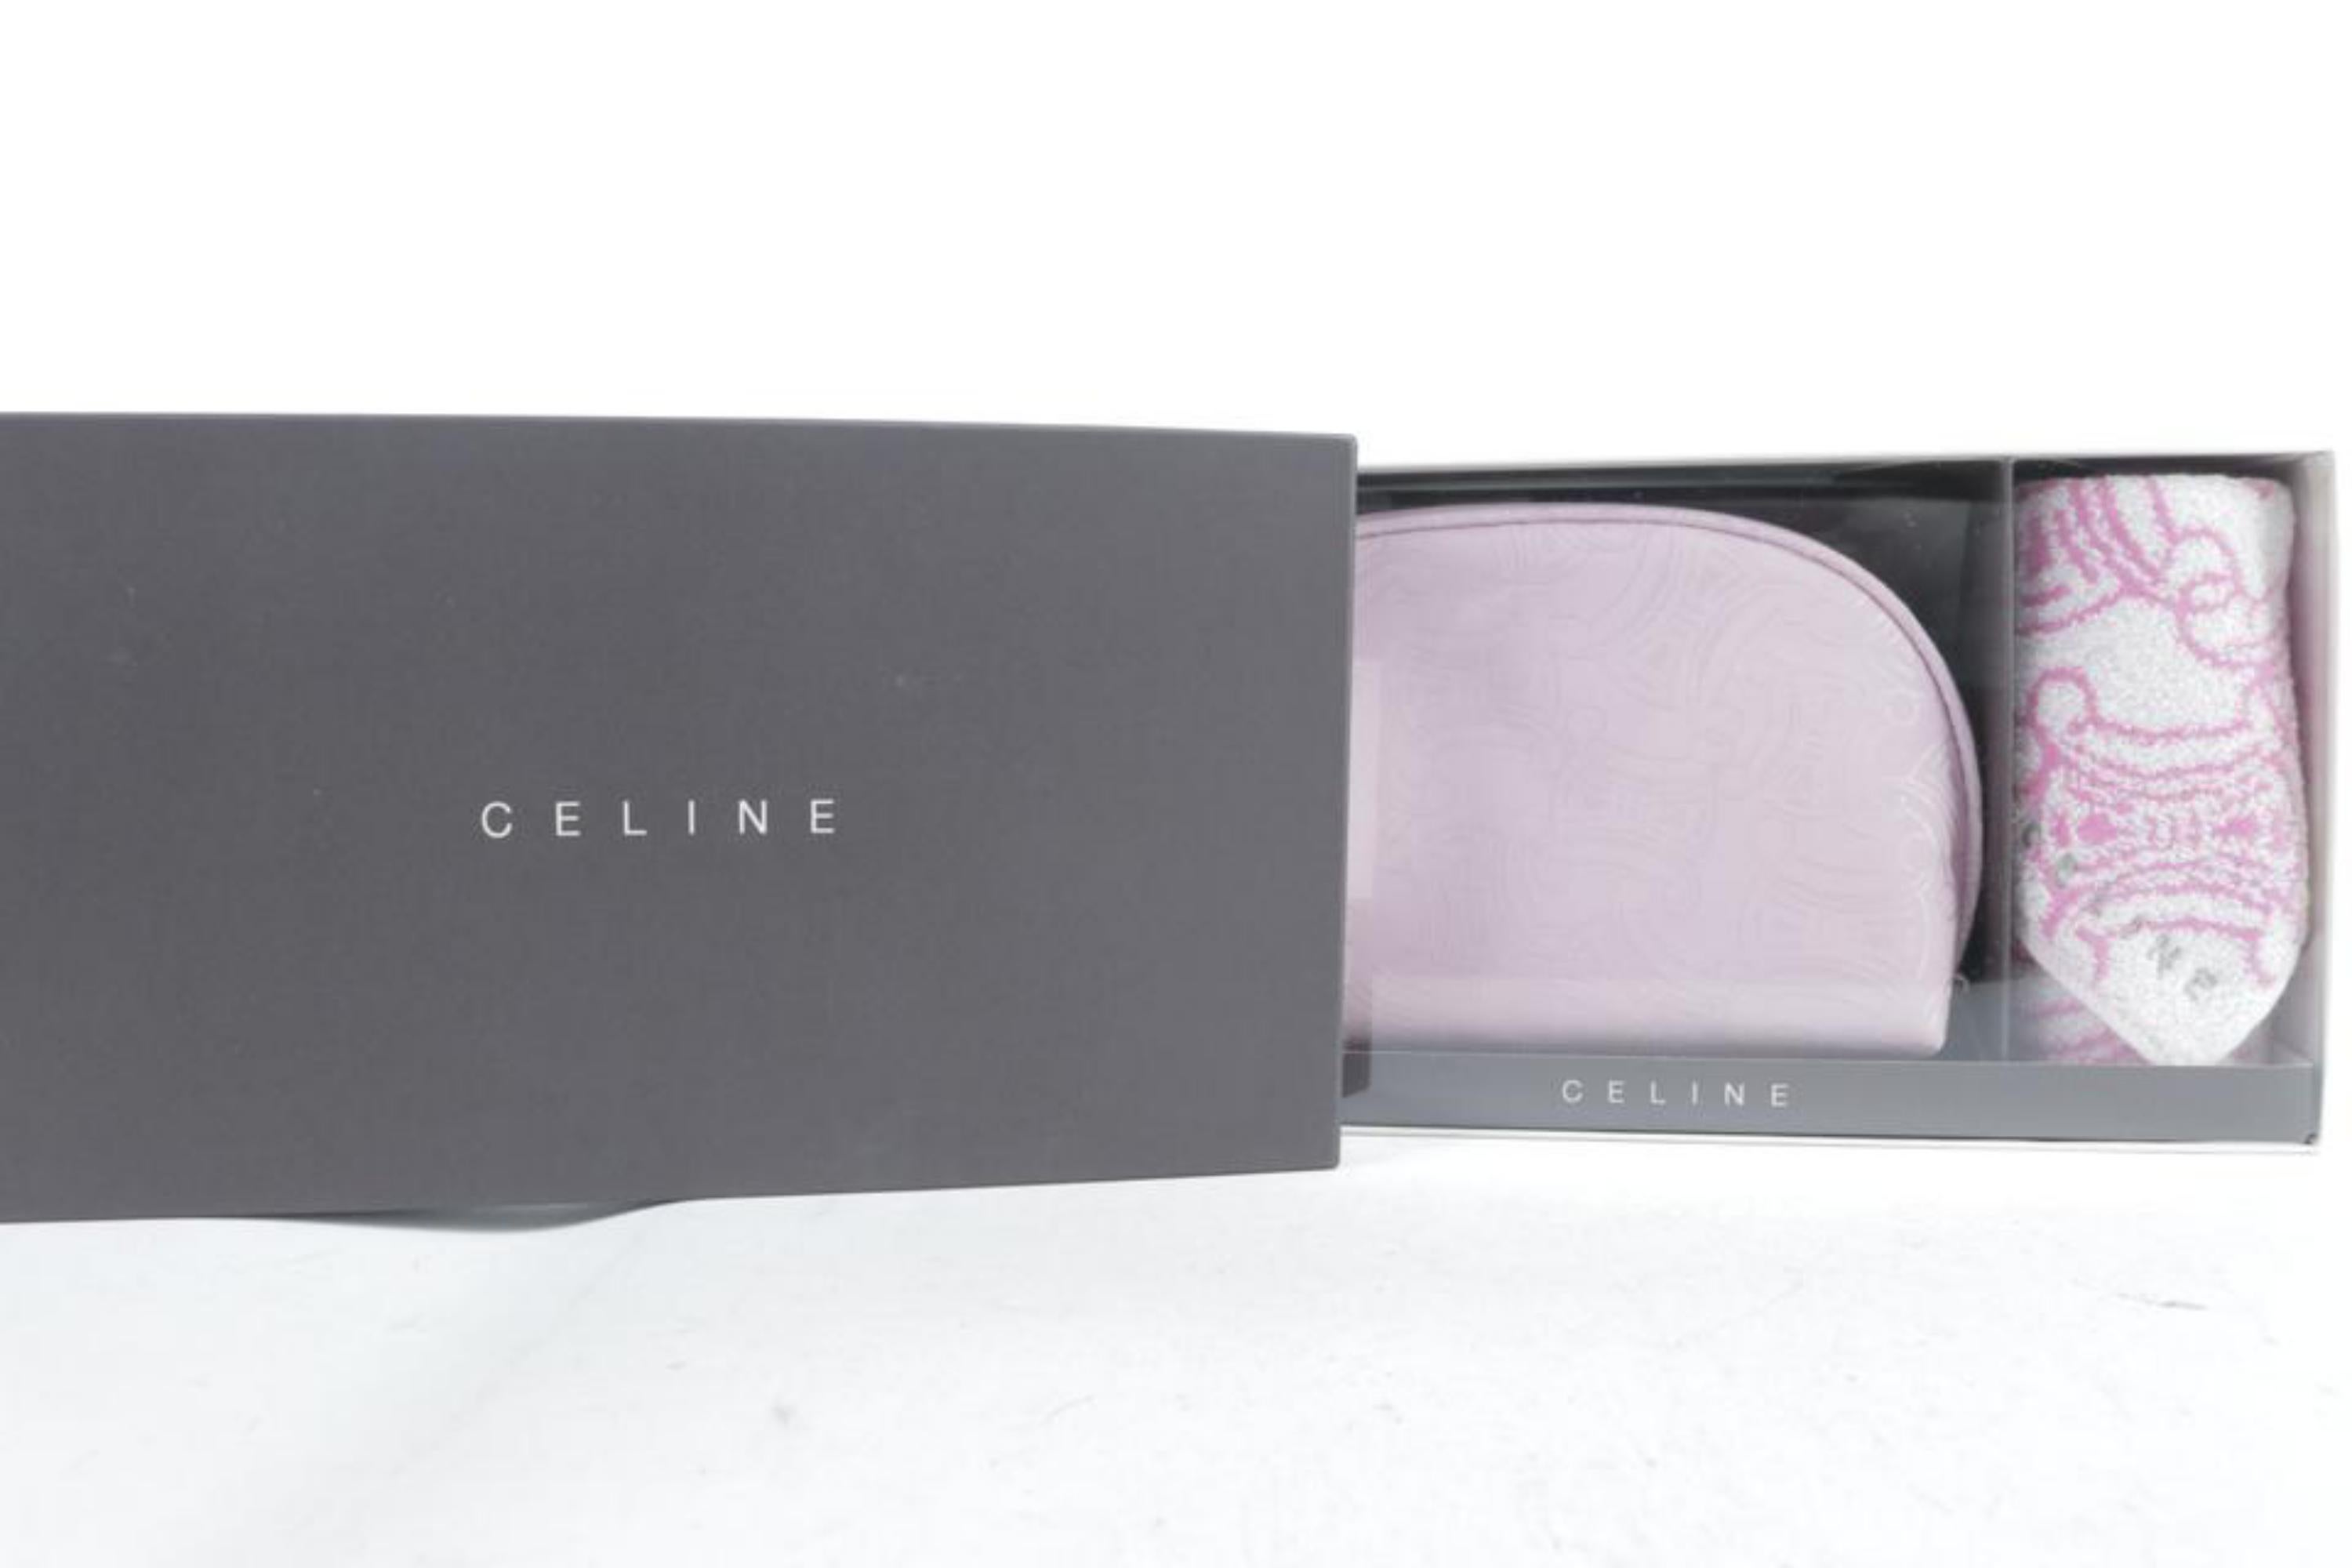 Céline Cosmetic Pouch and Towel Set 1CE1123
OVERALL NEW IN BOX CONDITION
( 10/10 or N )
Signs of Wear: Set is Brand New In Box

This item will ship out immediately.
Previously owned, unless otherwise stated.
This item does not come with any extra